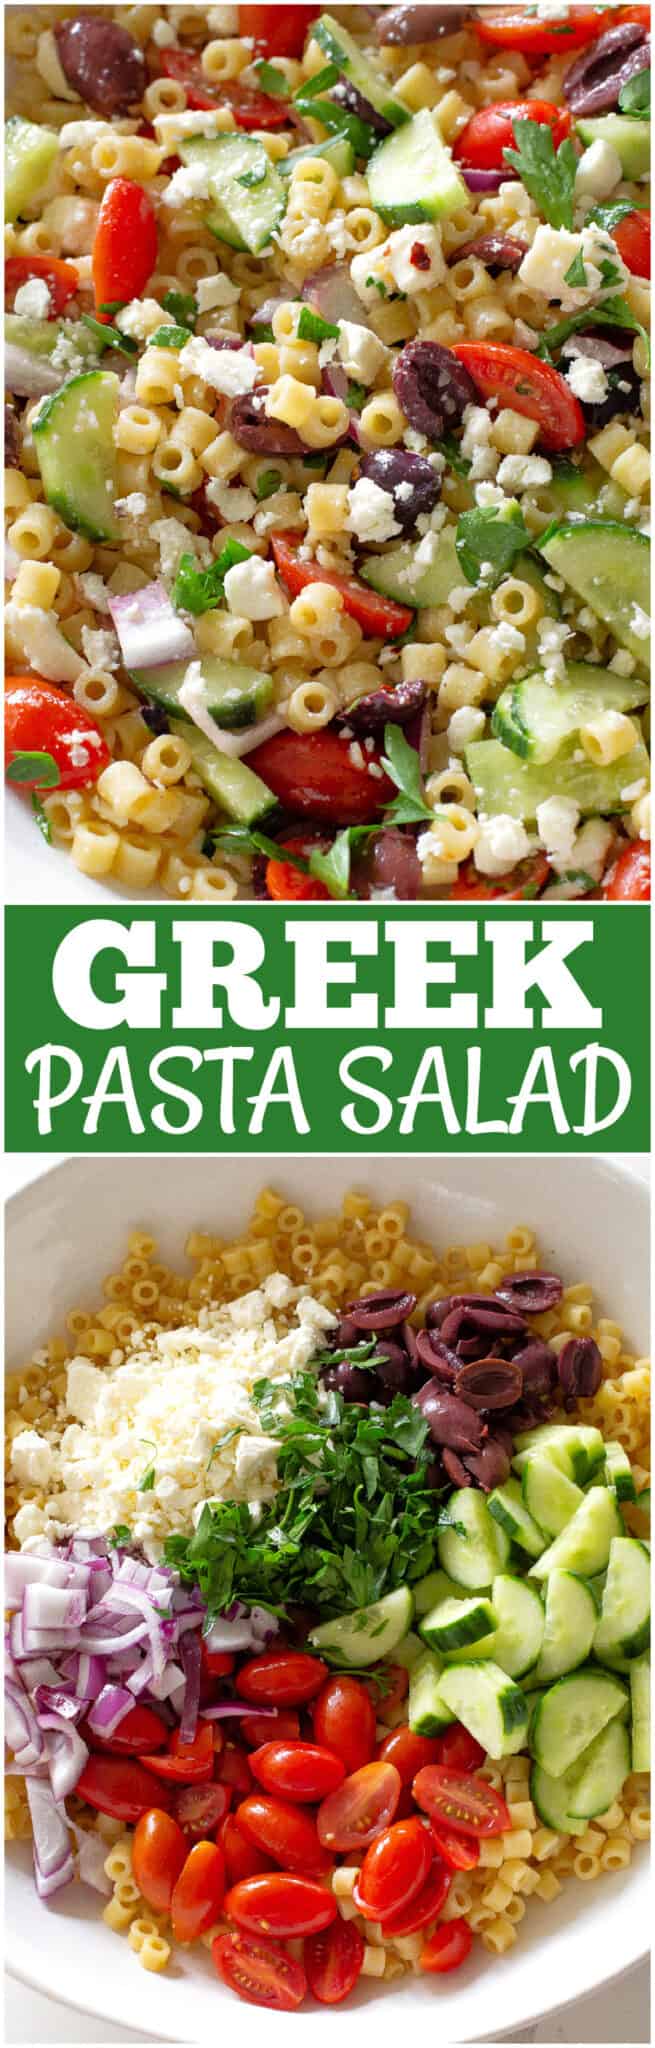 Greek Pasta Salad | The Girl Who Ate Everything